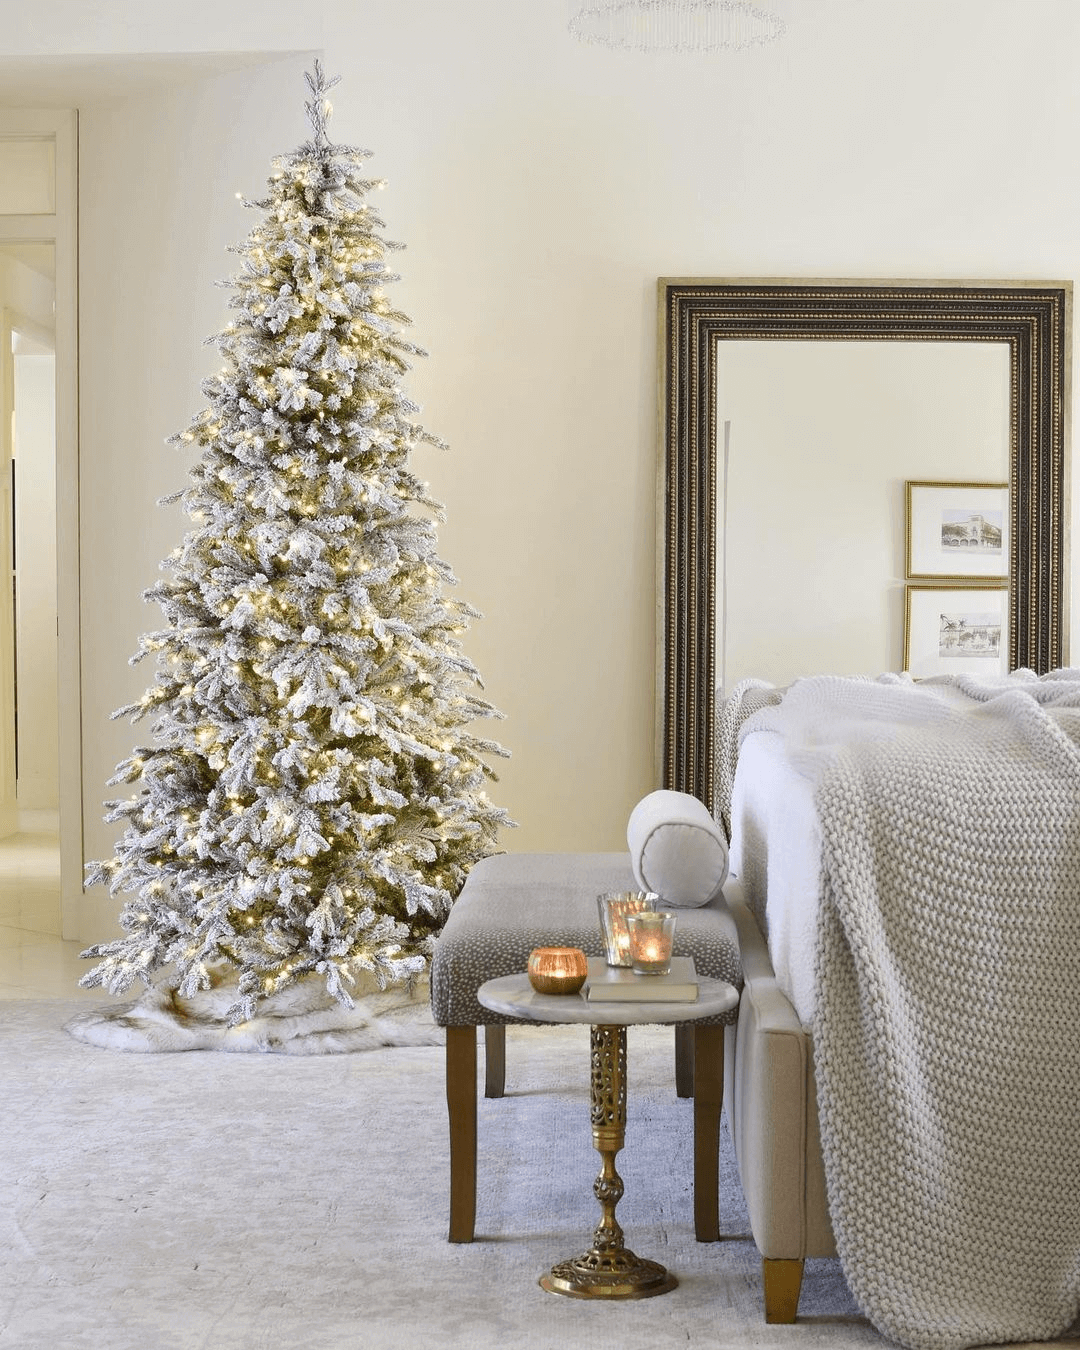 King of Christmas 6.5' Queen Flock® Slim Artificial Christmas Tree With 500 Warm White LED Lights